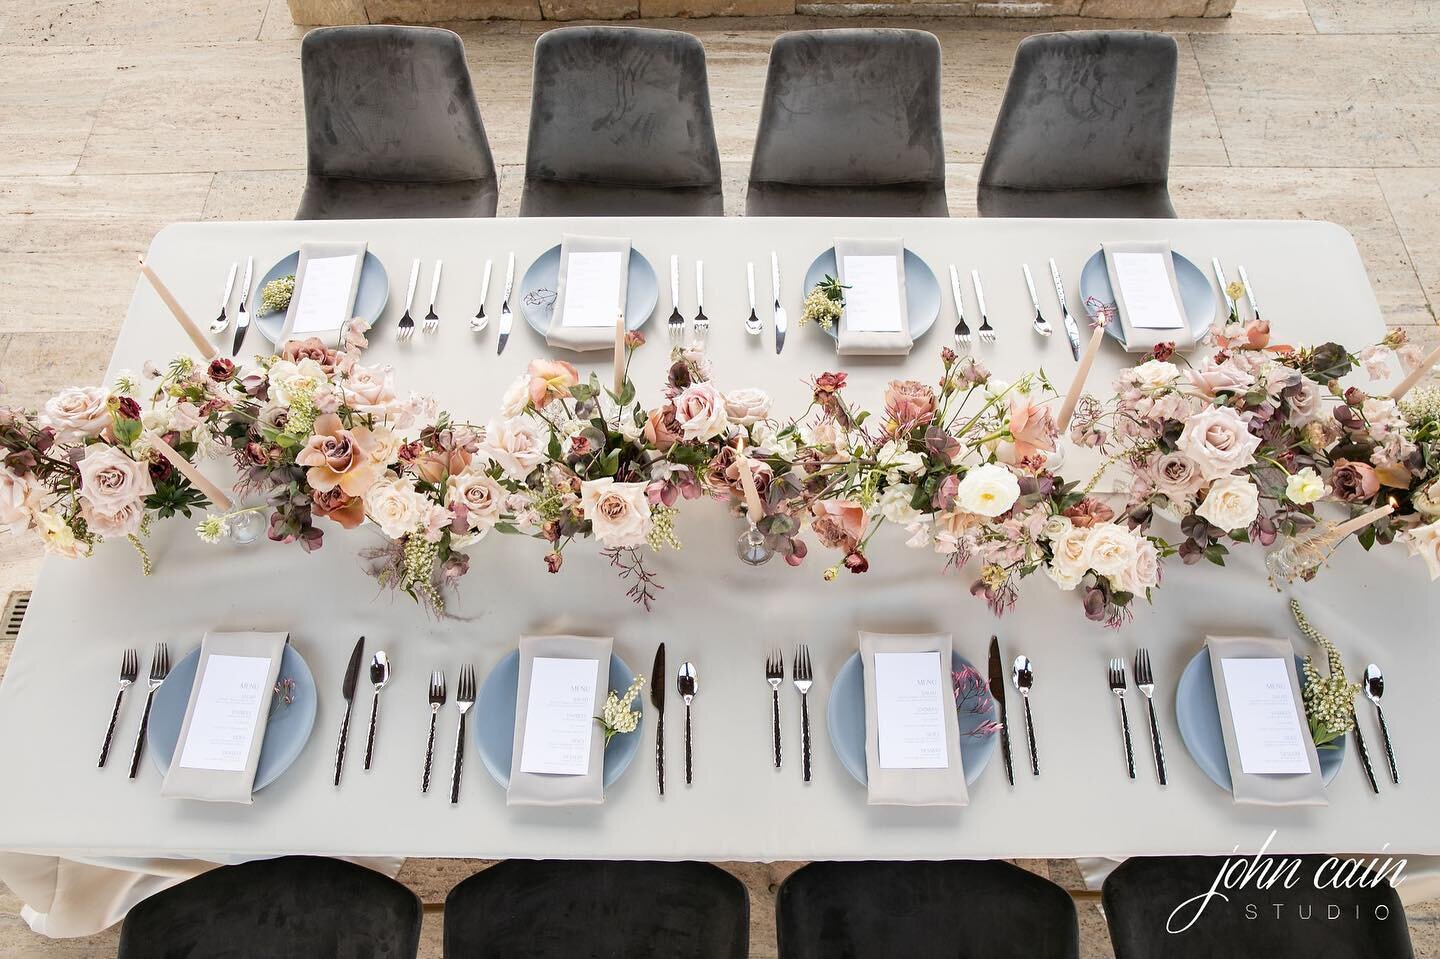 A beautiful intimate wedding dinner for eight. A favorite color palette for me 💛
Photo: @johncainphotography 
Rentals: @lawsonrentals 
Planning/design: @lyonsevents 
Paper: @lyonspaperie